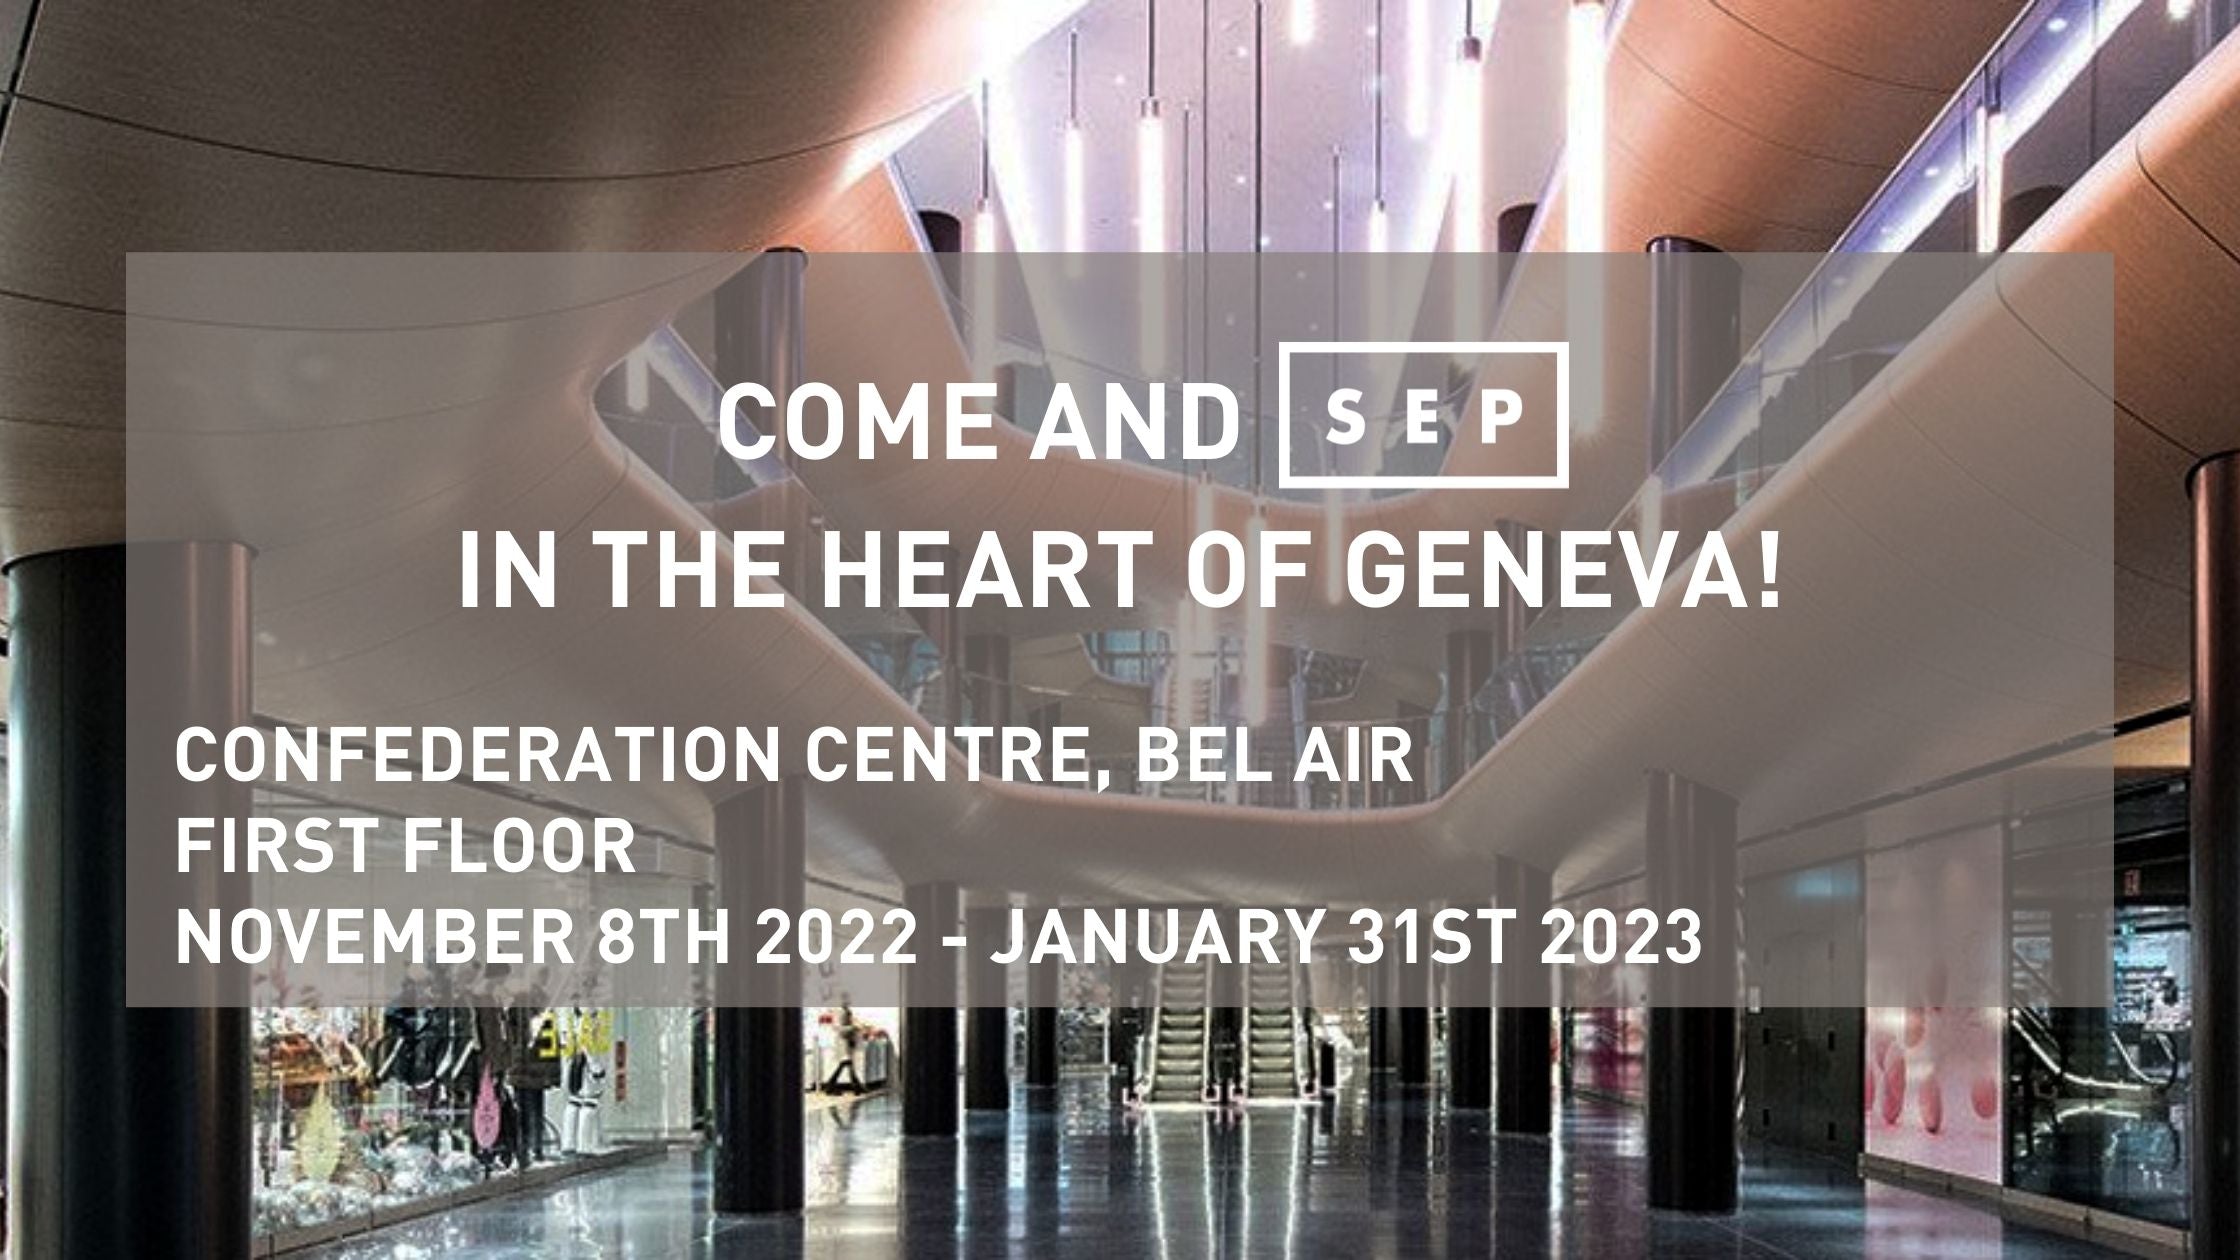 Confederation CENTRE, Bel Air first floor November 8th 2022 - January 31st 2023